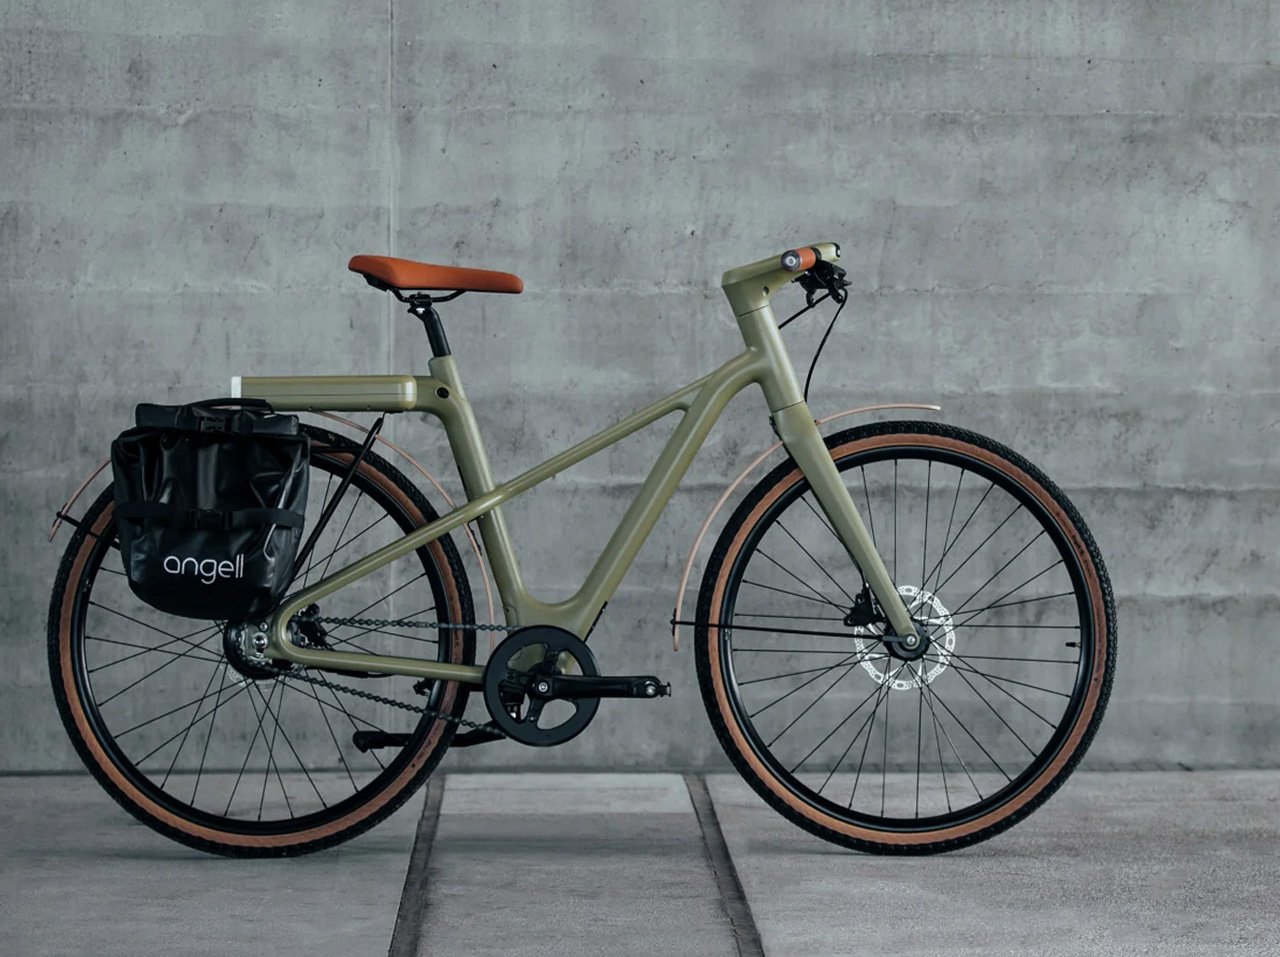 French bicycle brand Angell unveiled “one of the world’s lightest e-bikes”